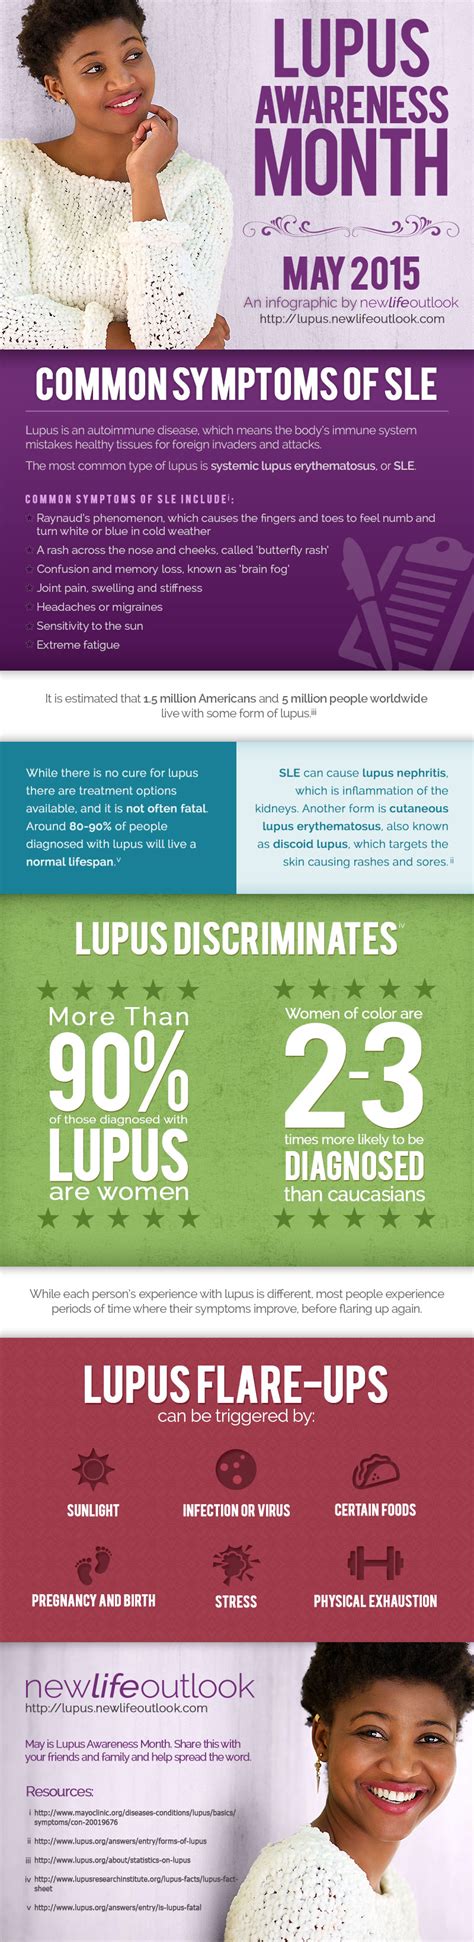 Infographic Why Bother With Lupus Awareness Month